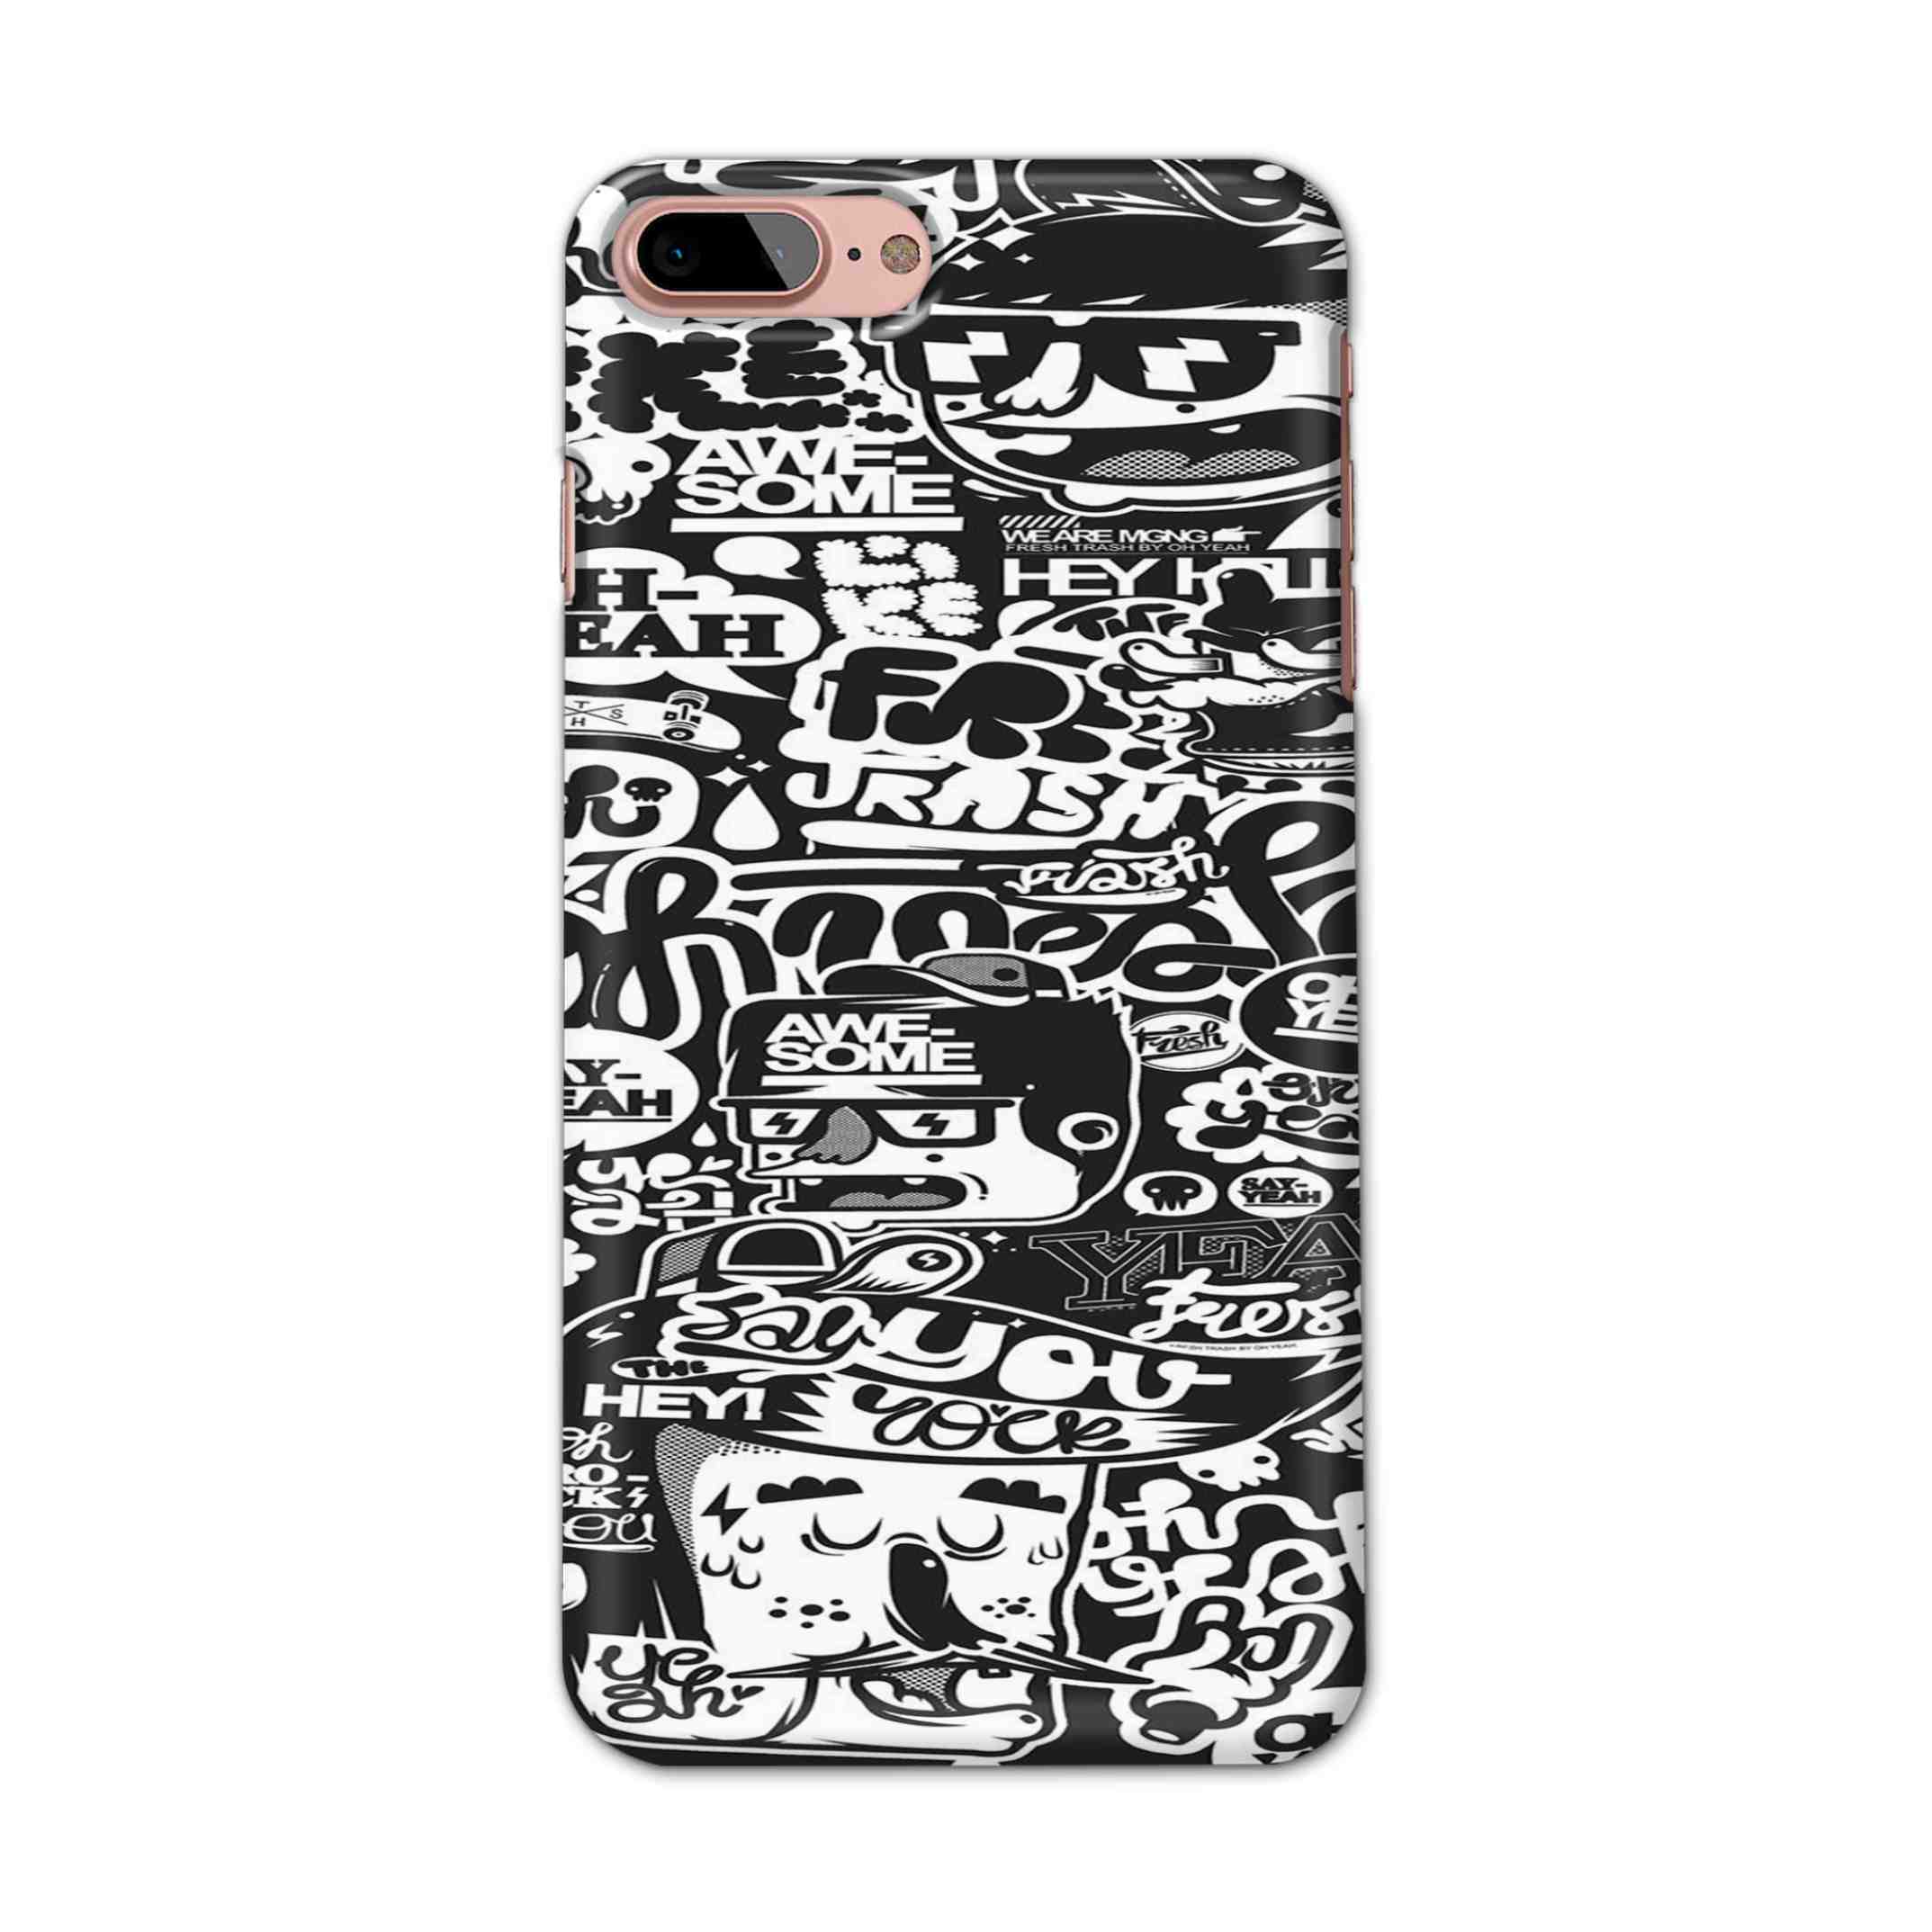 Buy Awesome Hard Back Mobile Phone Case/Cover For iPhone 7 Plus / 8 Plus Online